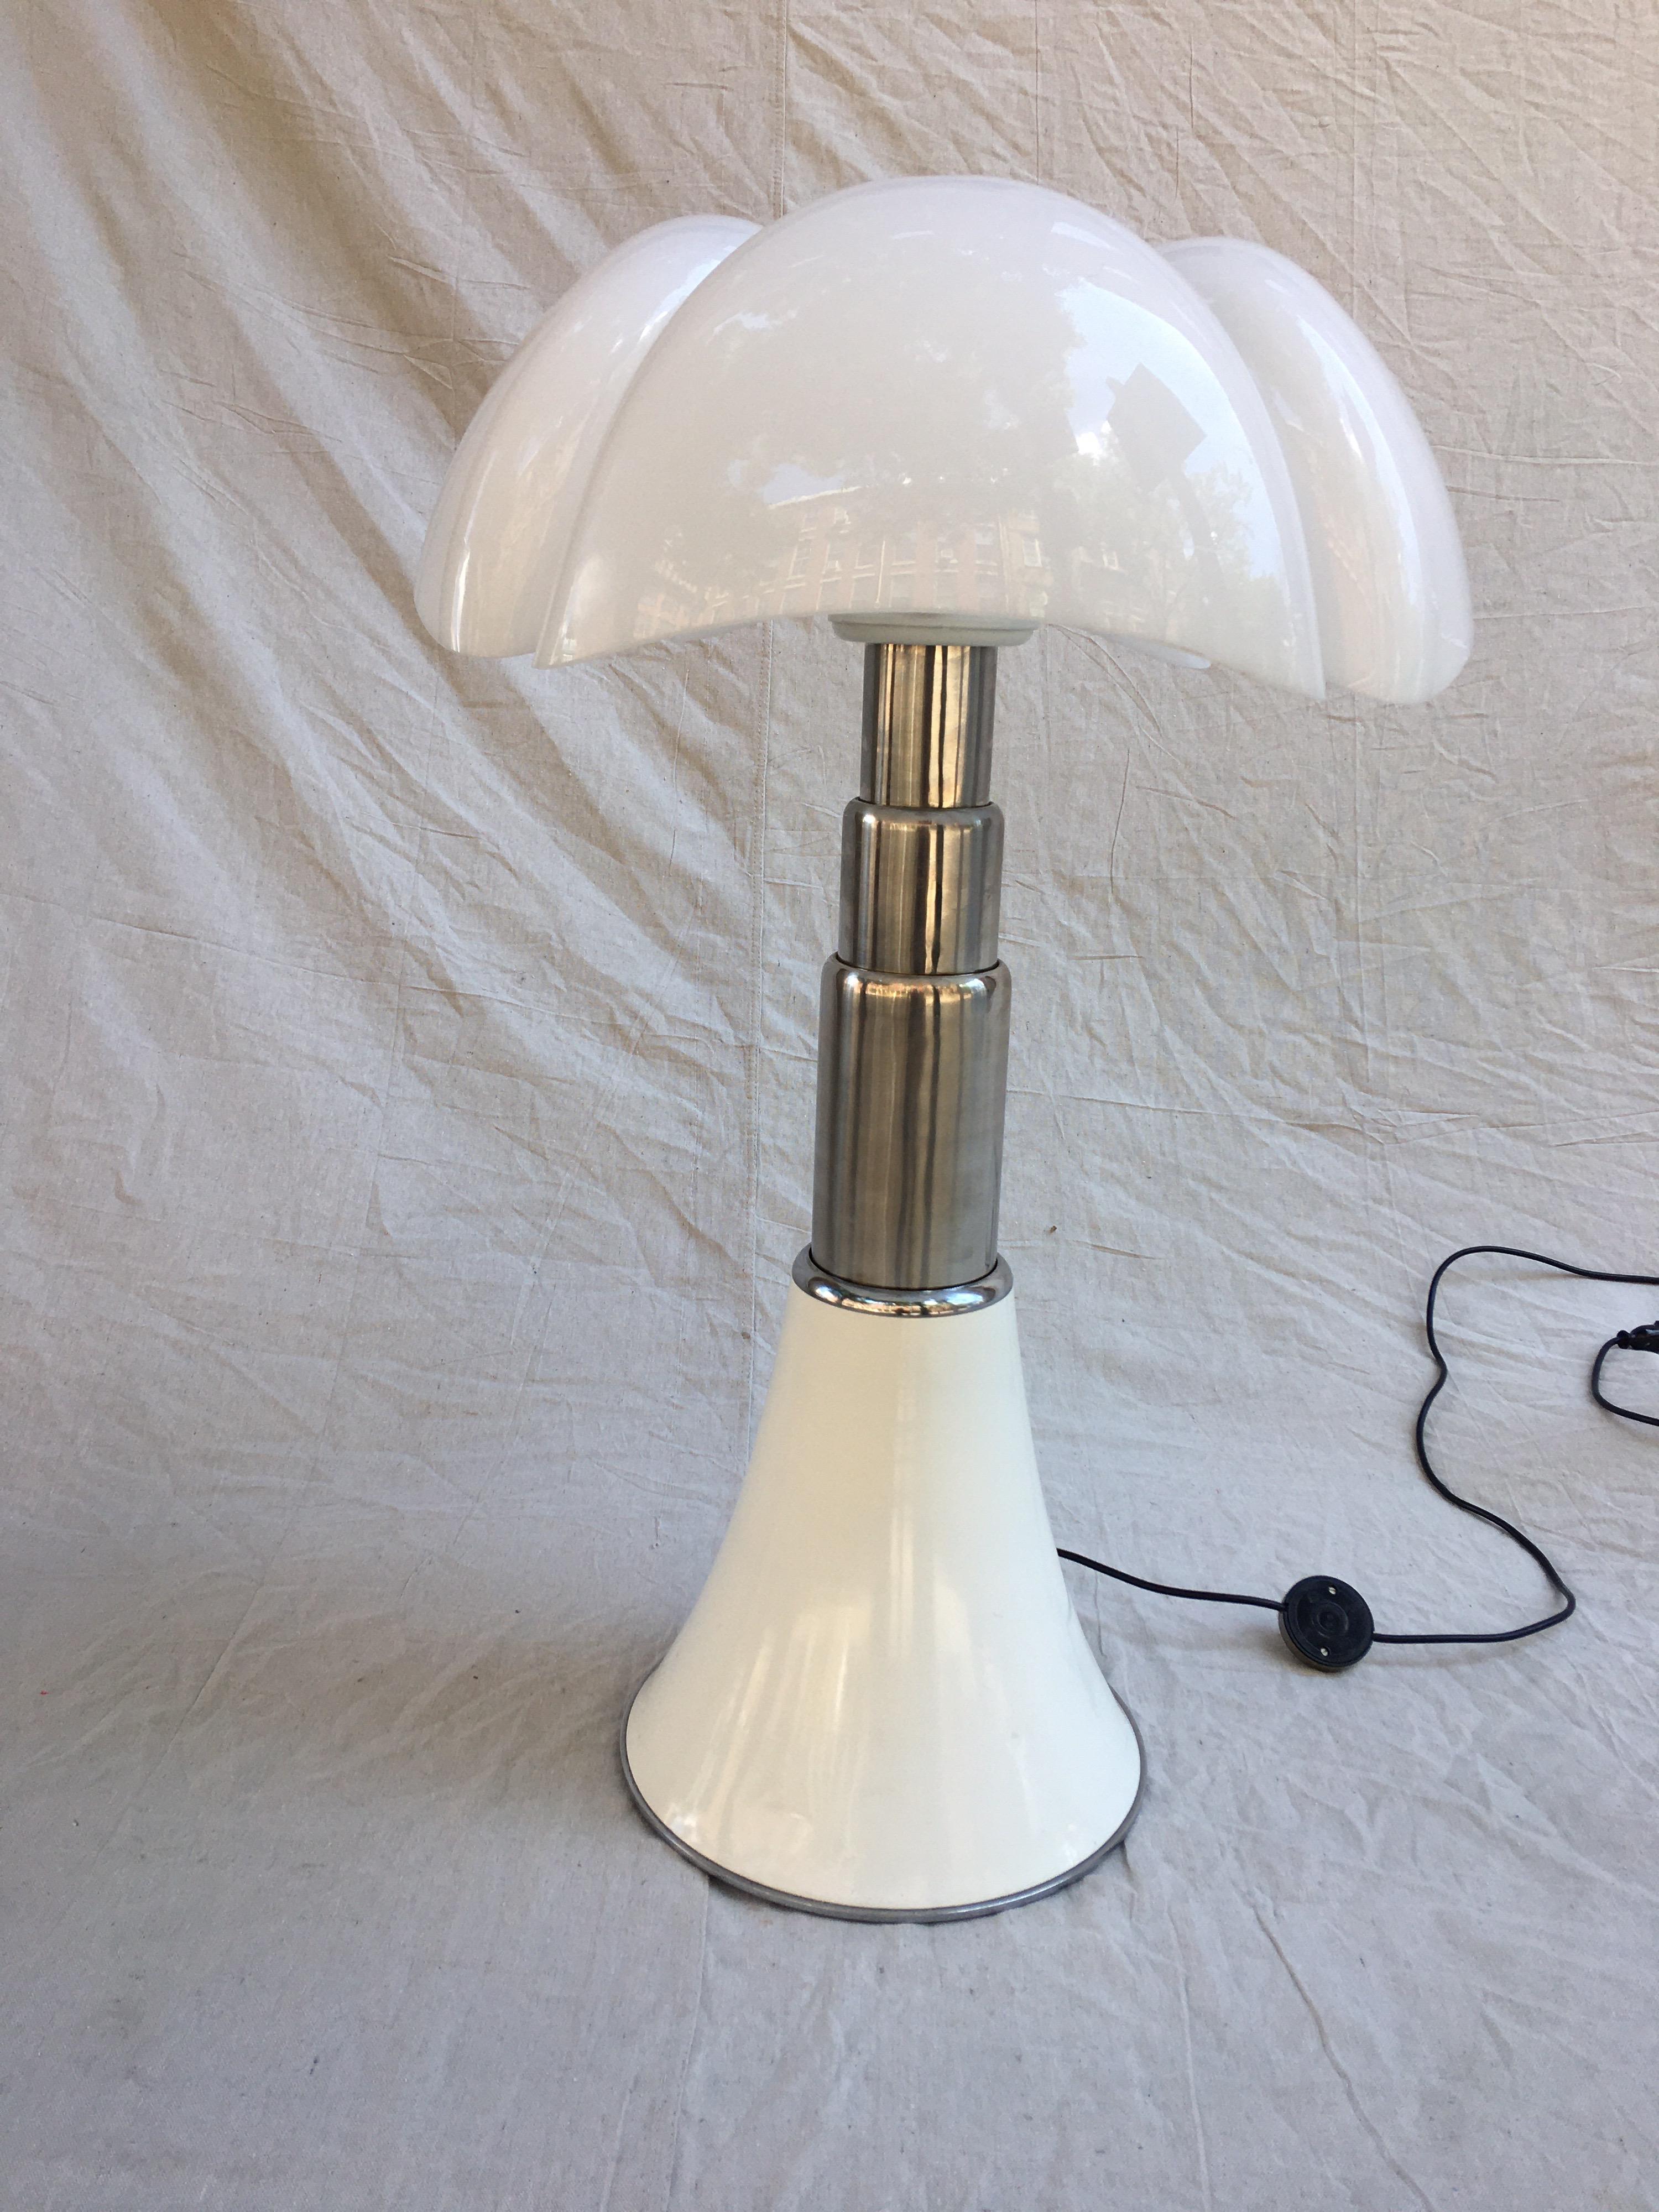 Gae Aulenti for Martinelli Luce Pipistrello telescoping table lamp. Base shows some small dents and shade has one small hole towards top, as seen in photos. Beautiful statement lamp, that still presents very well!